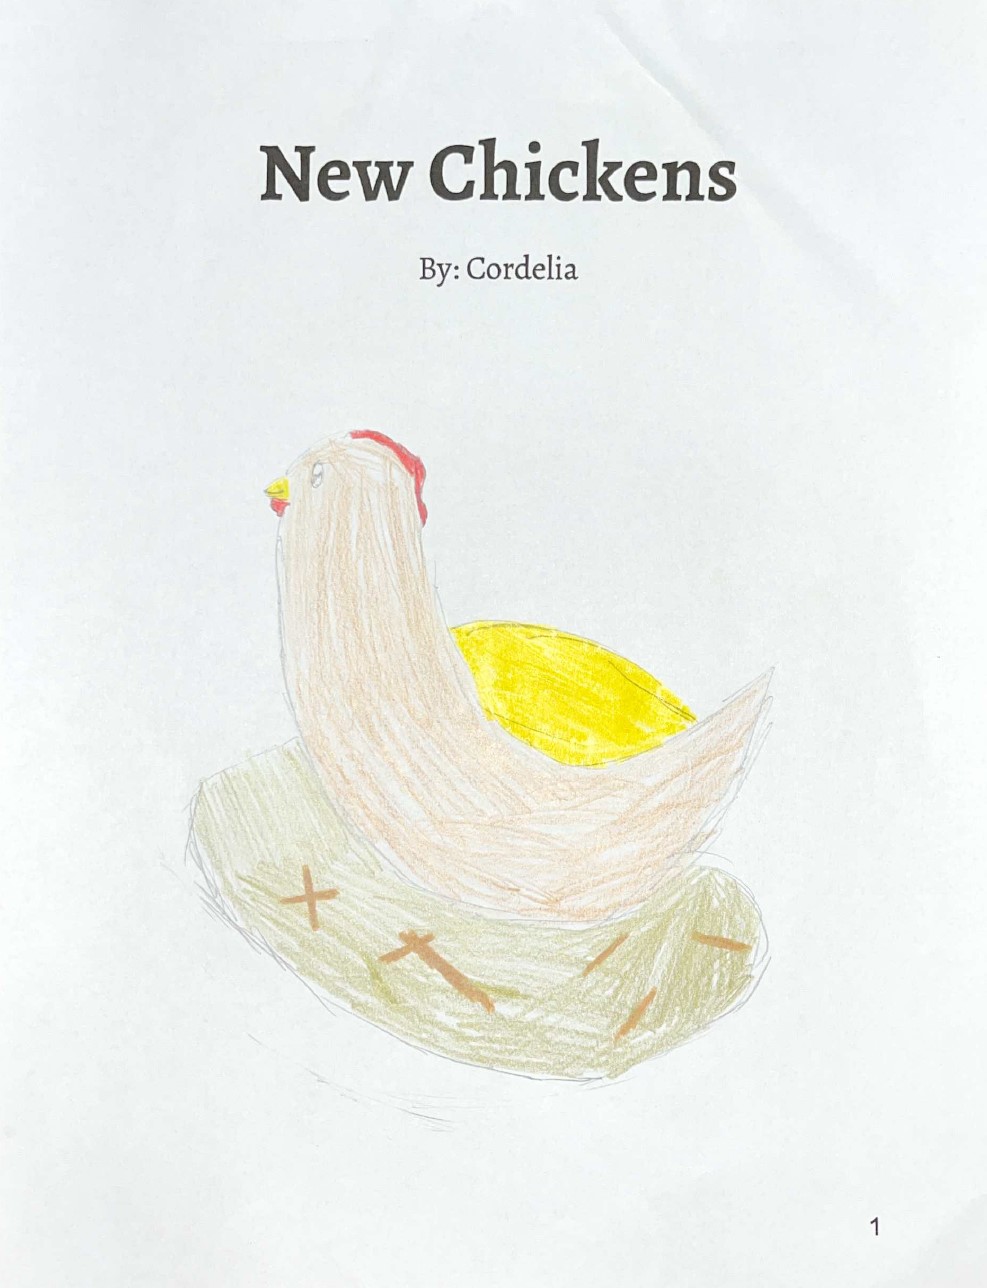 New Chickens by Cordelia P.